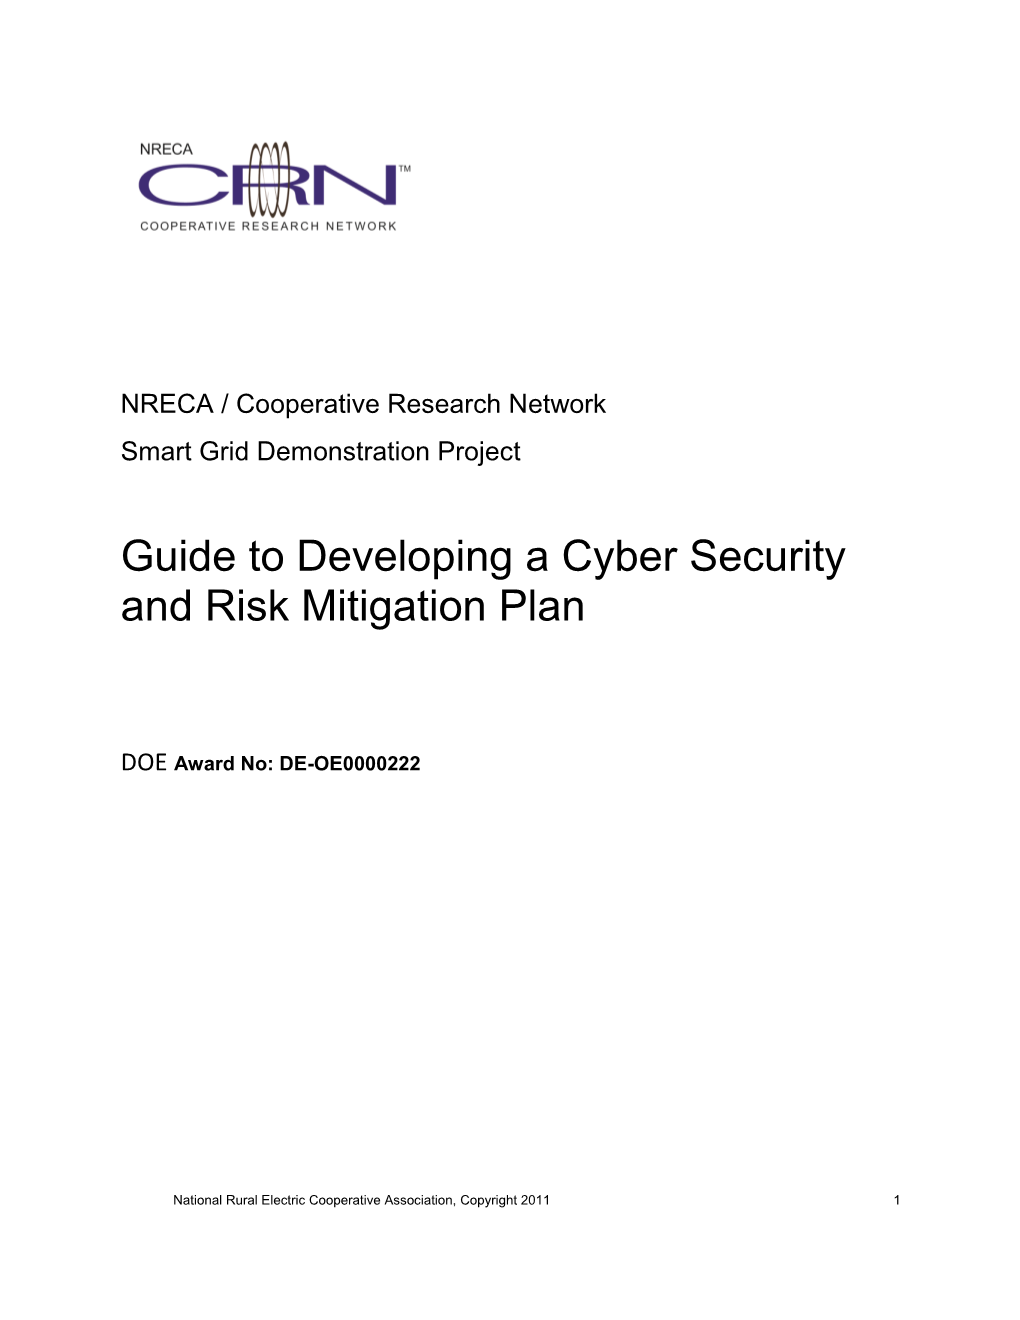 Guide to Developing a Cyber Security and Risk Mitigation Plan